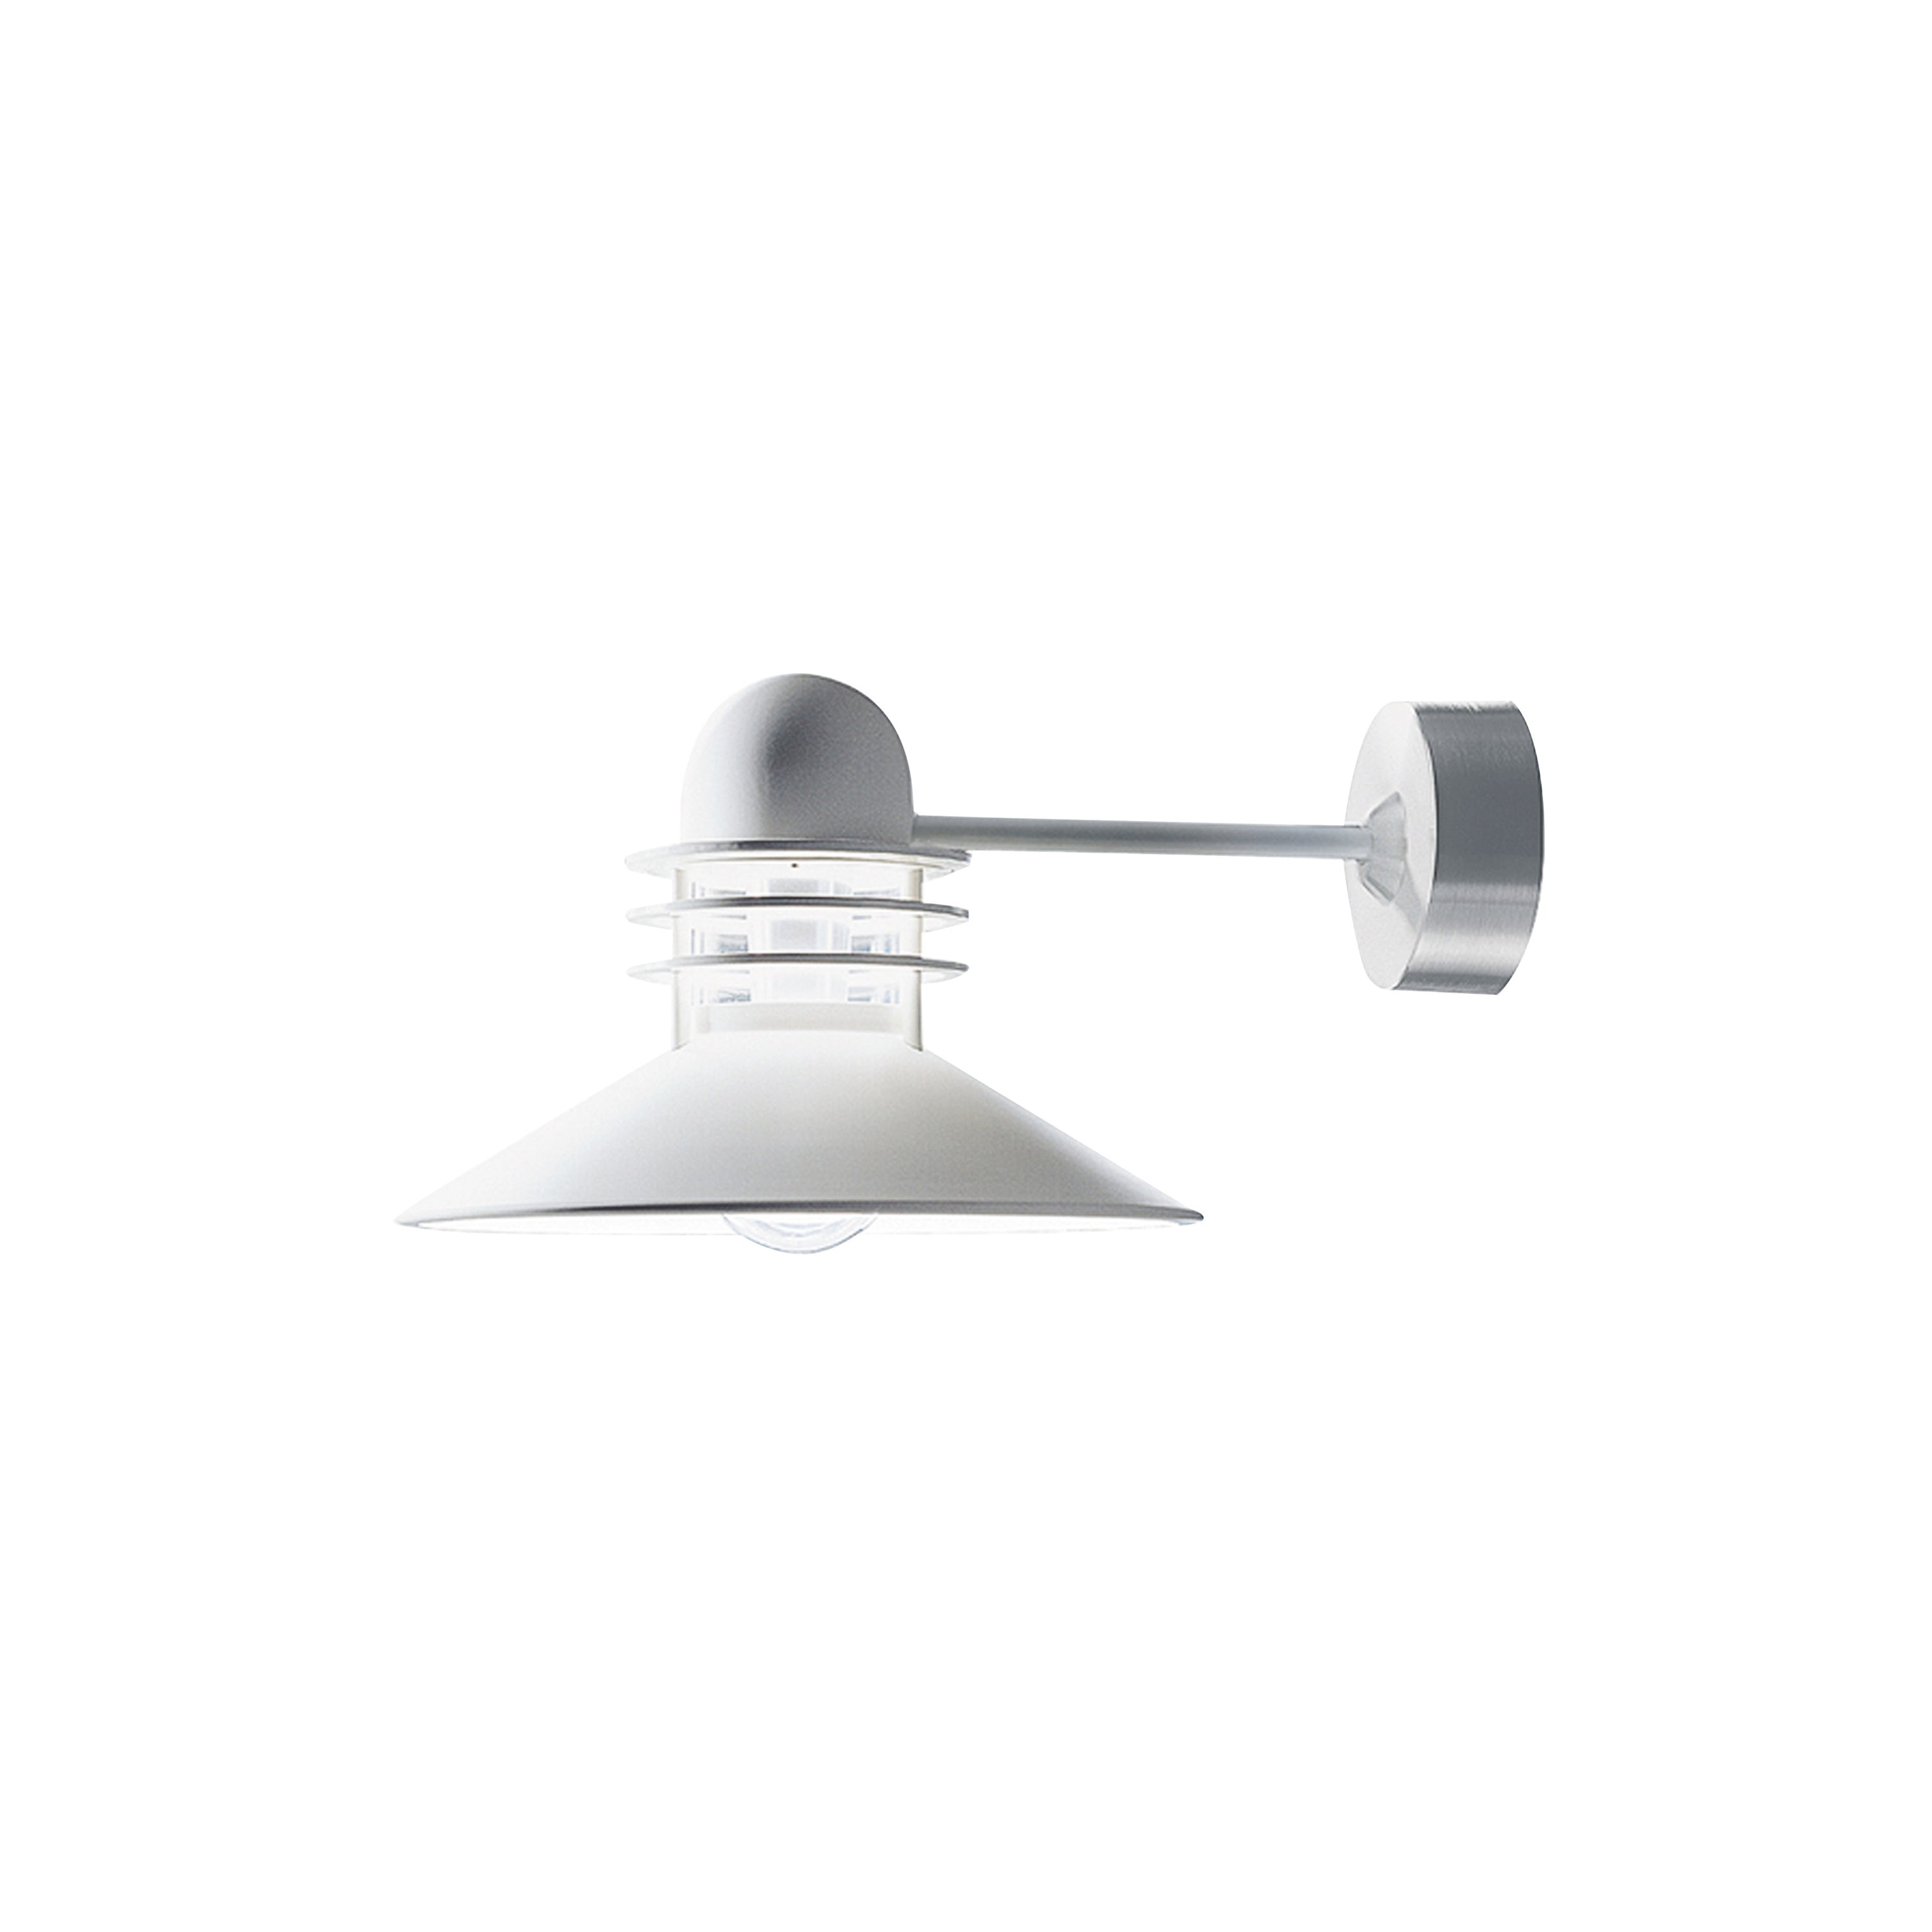 Nyhavn Wall Lamp: Outdoor + White